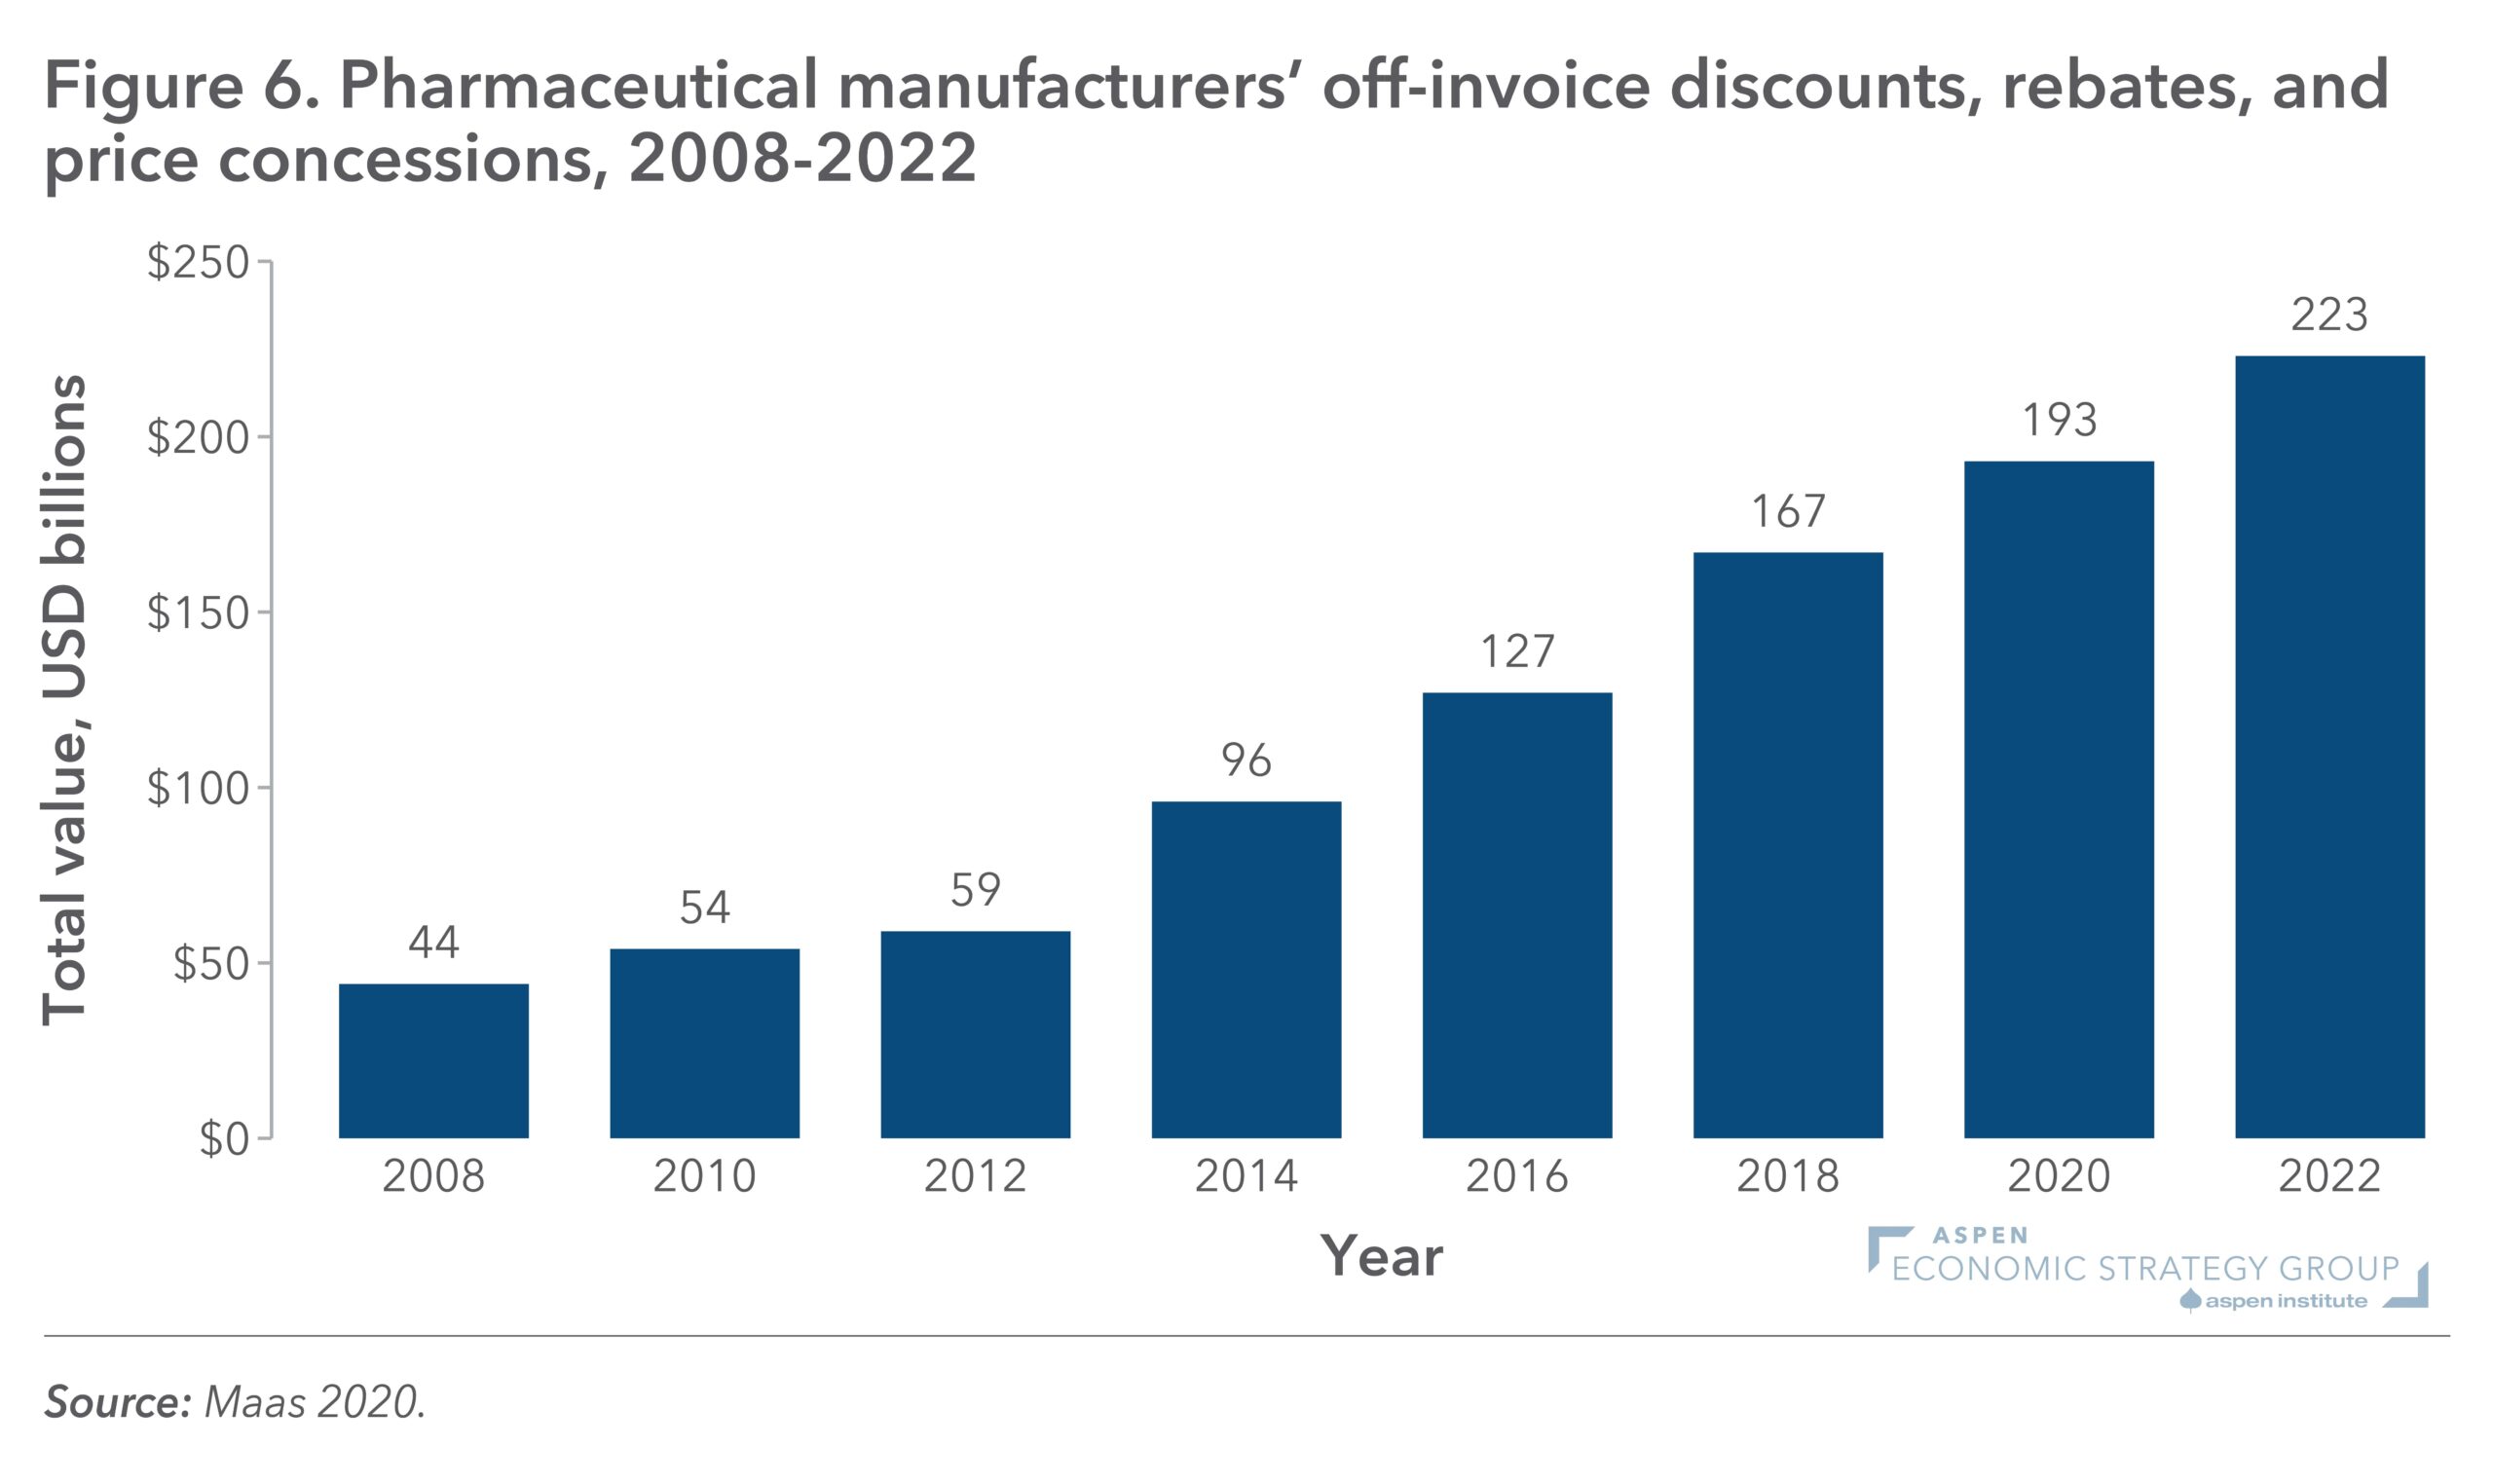 Figure 6: Pharmaceutical Manufacturers’ Off-Invoice Discounts, Rebates, and Price Concessions, 2008-2022